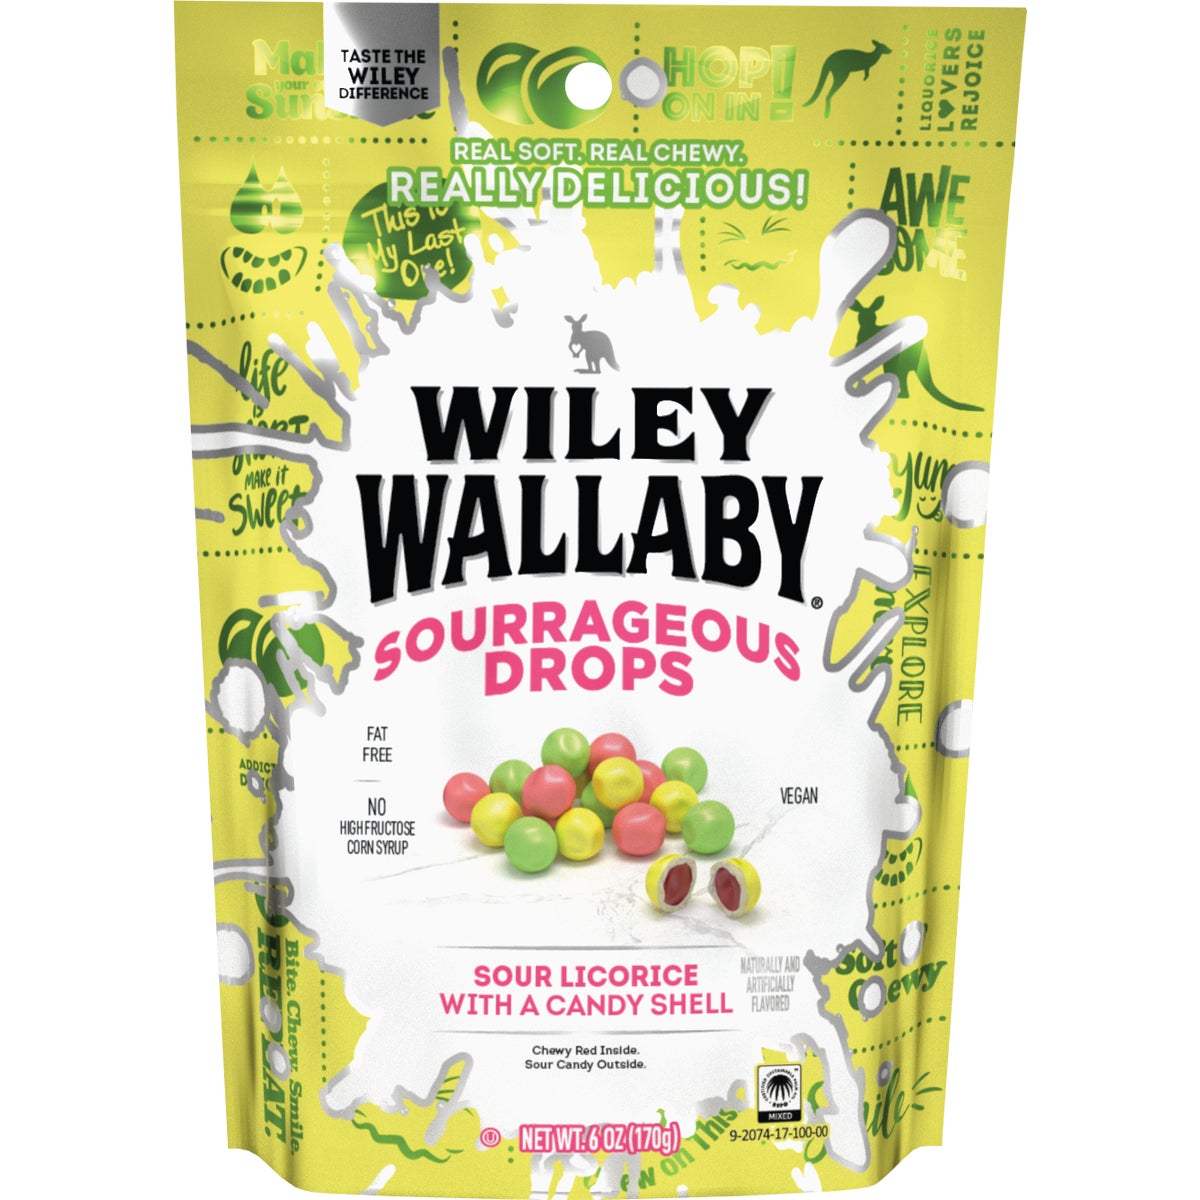 Wiley Wallaby 6 Oz. Sourrageous Drops